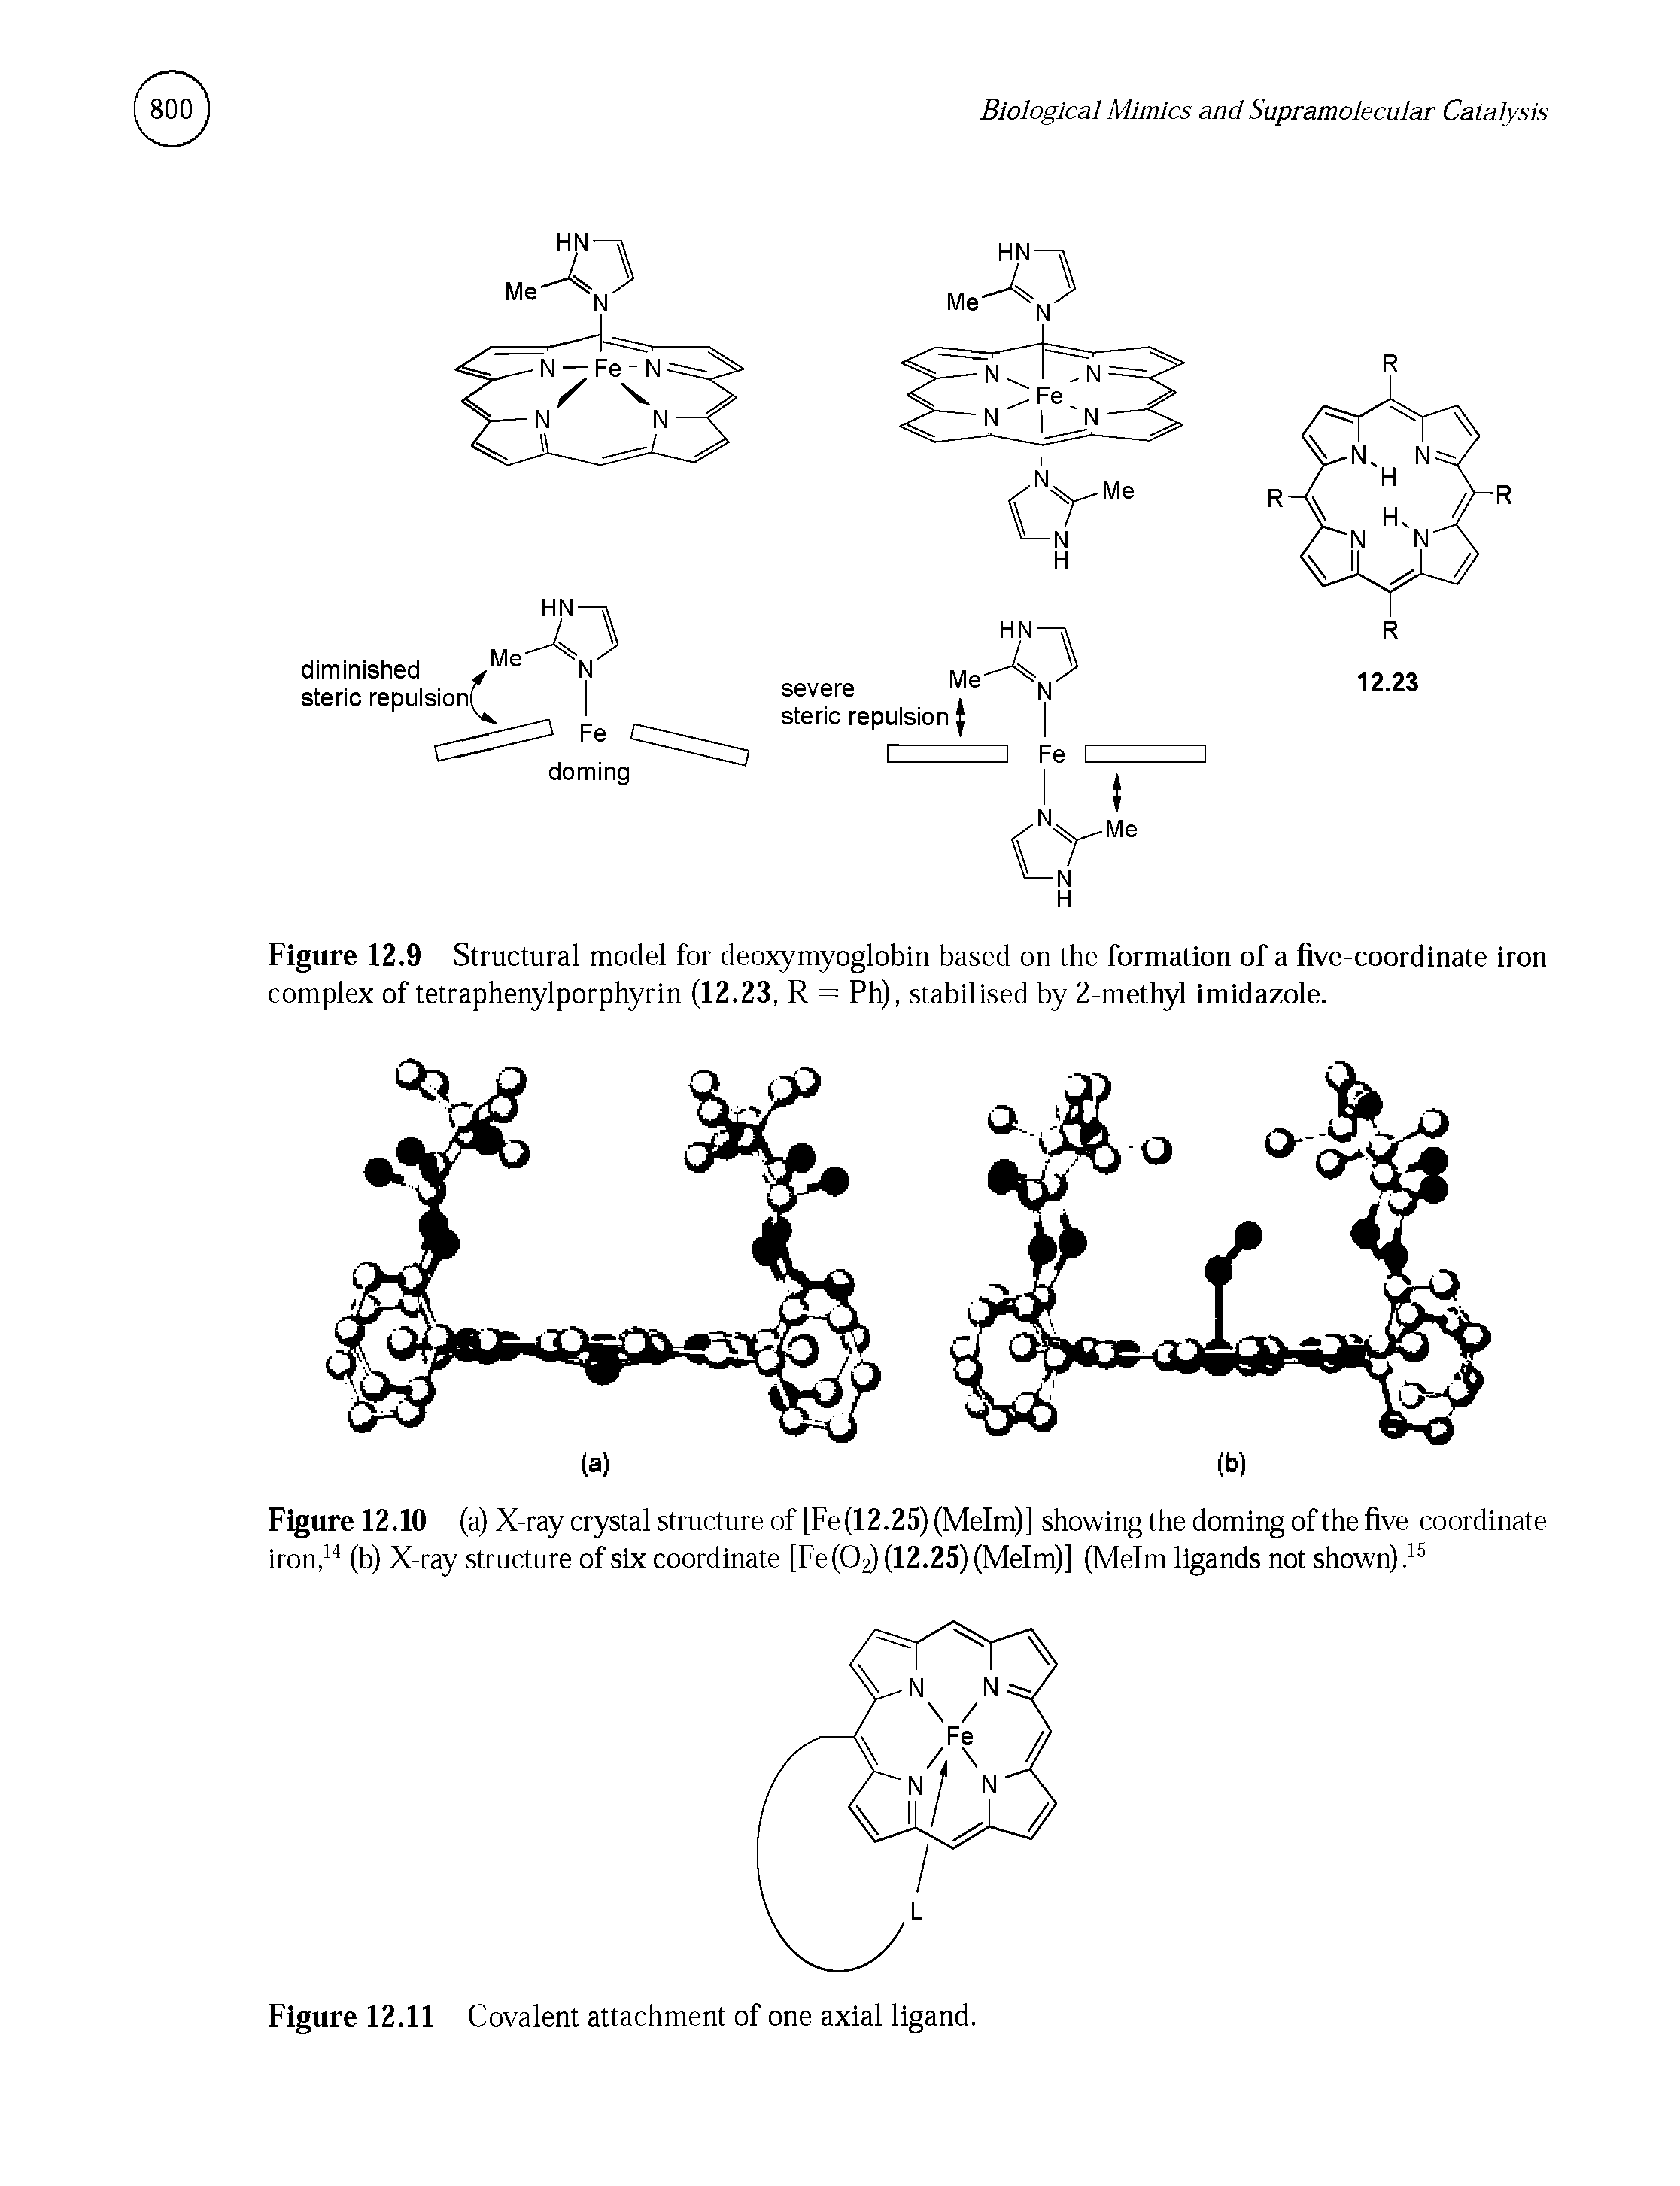 Figure 12.9 Structural model for deoxymyoglobin based on the formation of a five-coordinate iron complex of tetraphenylporphyrin (12.23, R = Ph), stabilised by 2-methyl imidazole.